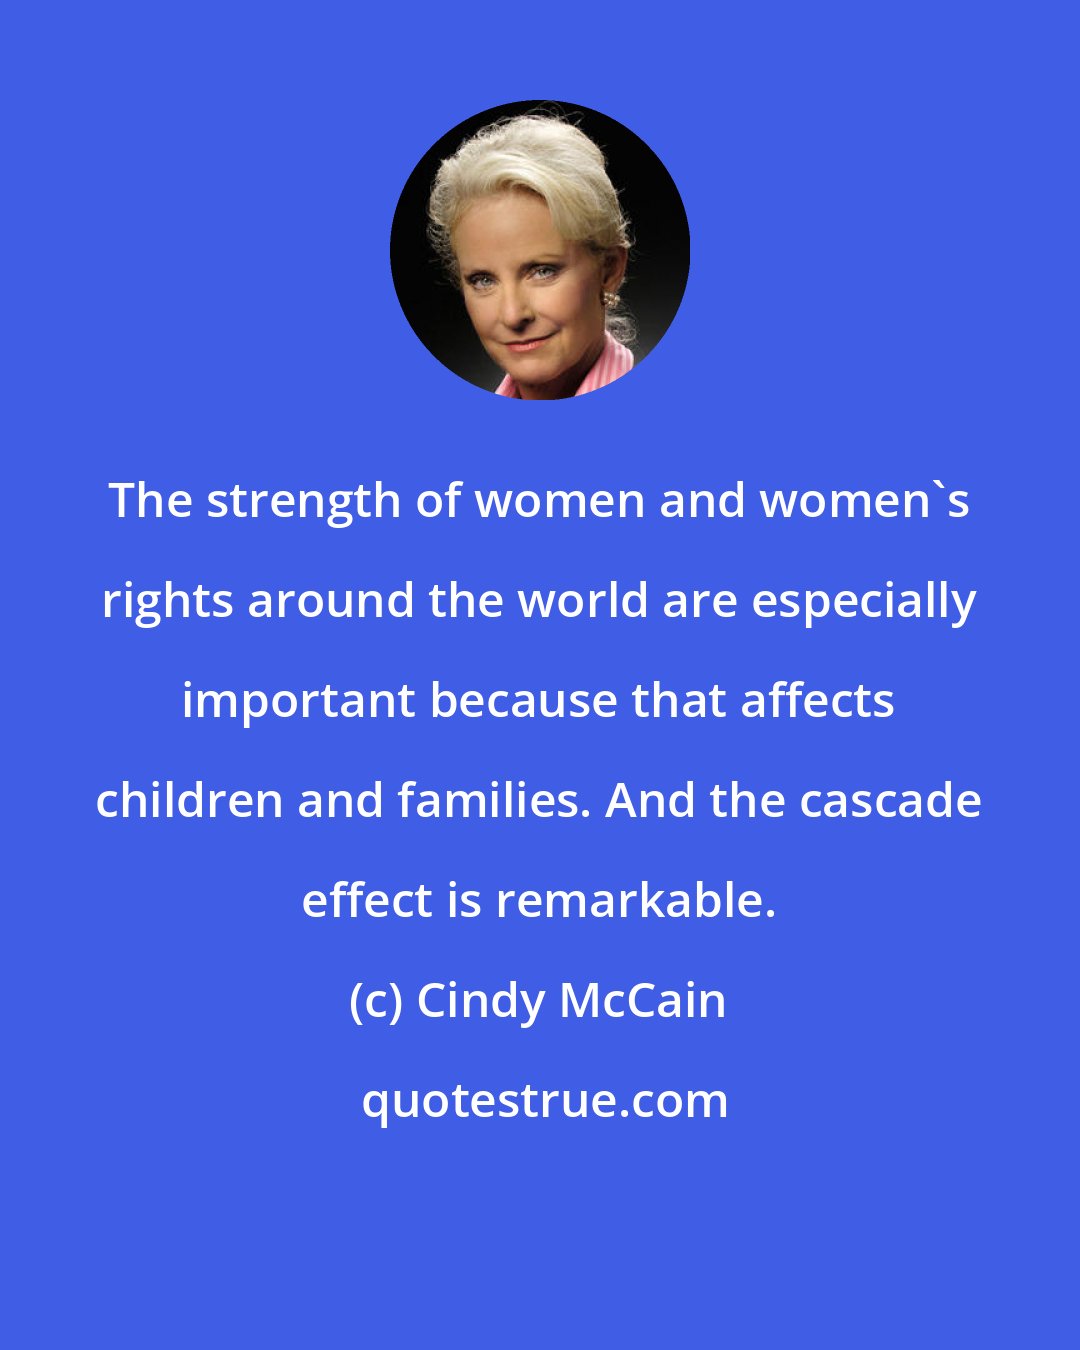 Cindy McCain: The strength of women and women's rights around the world are especially important because that affects children and families. And the cascade effect is remarkable.